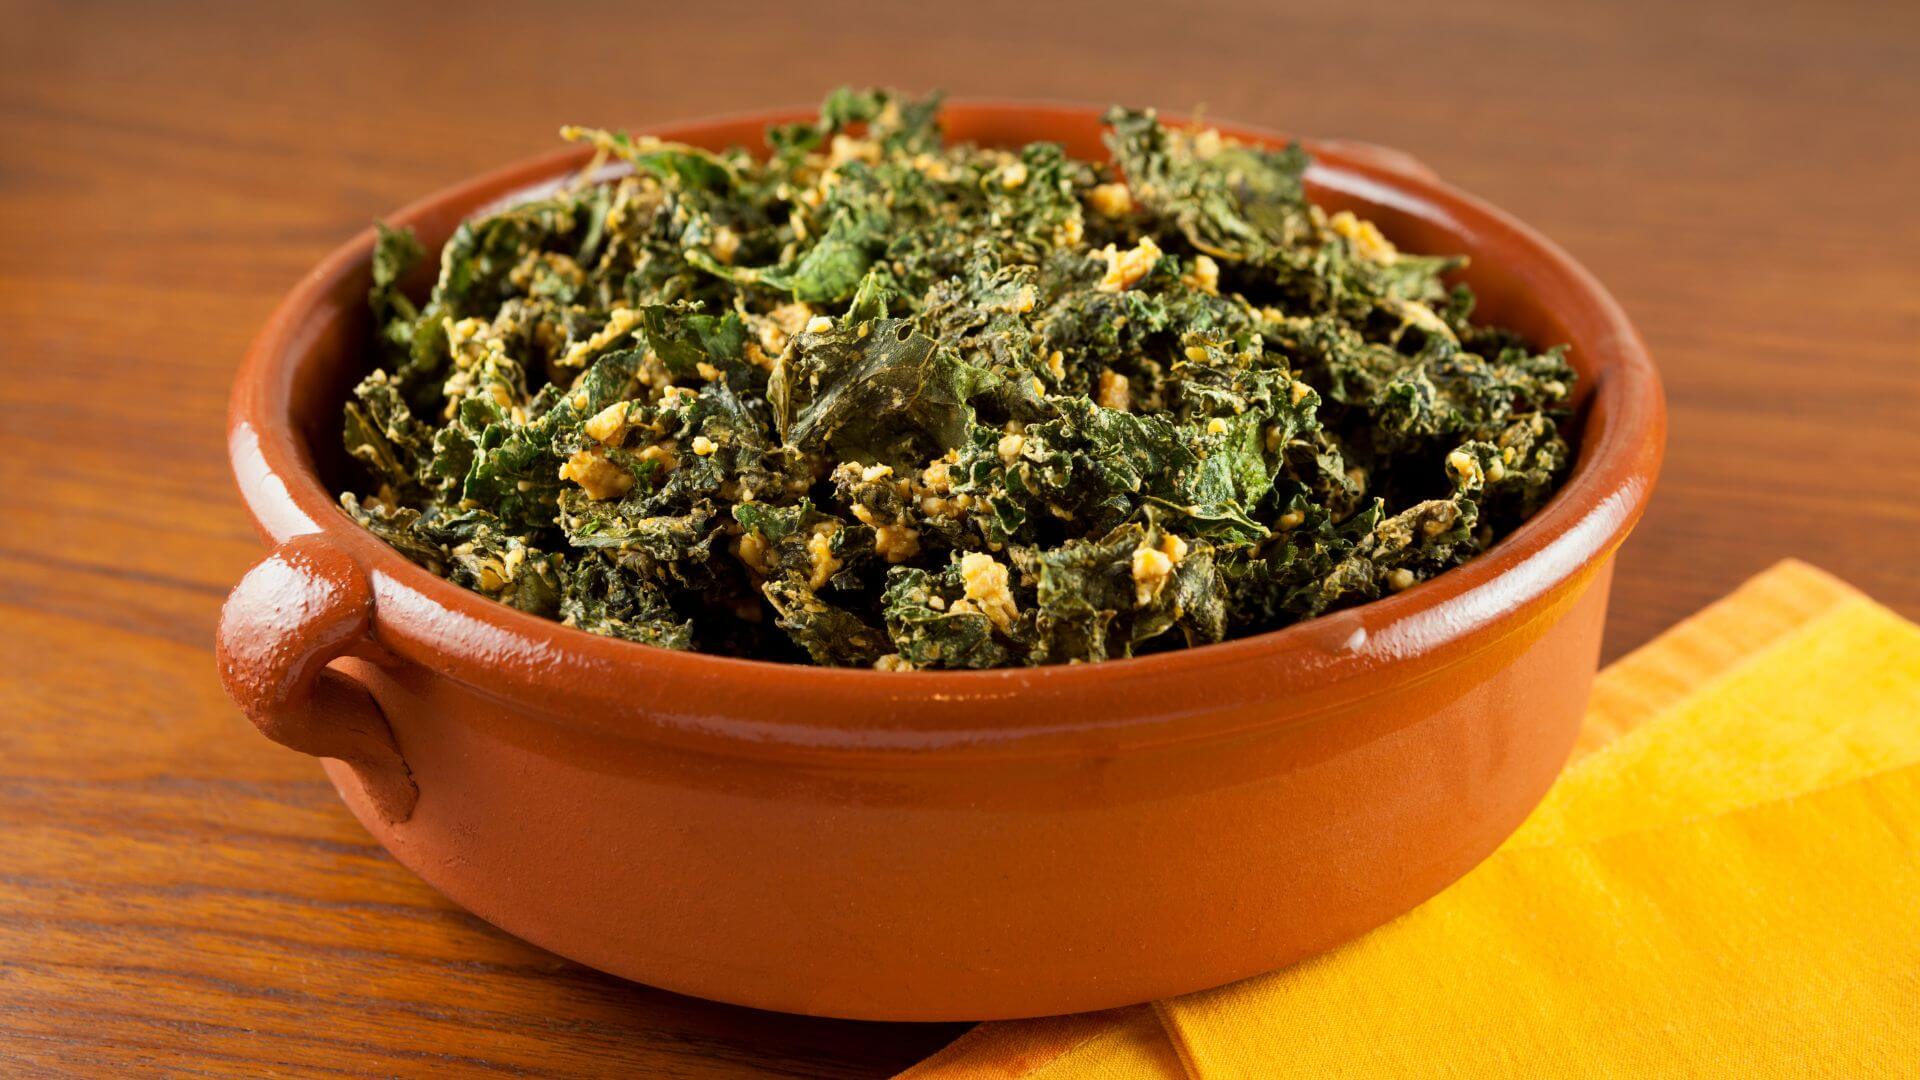 What Are Kale Chips?